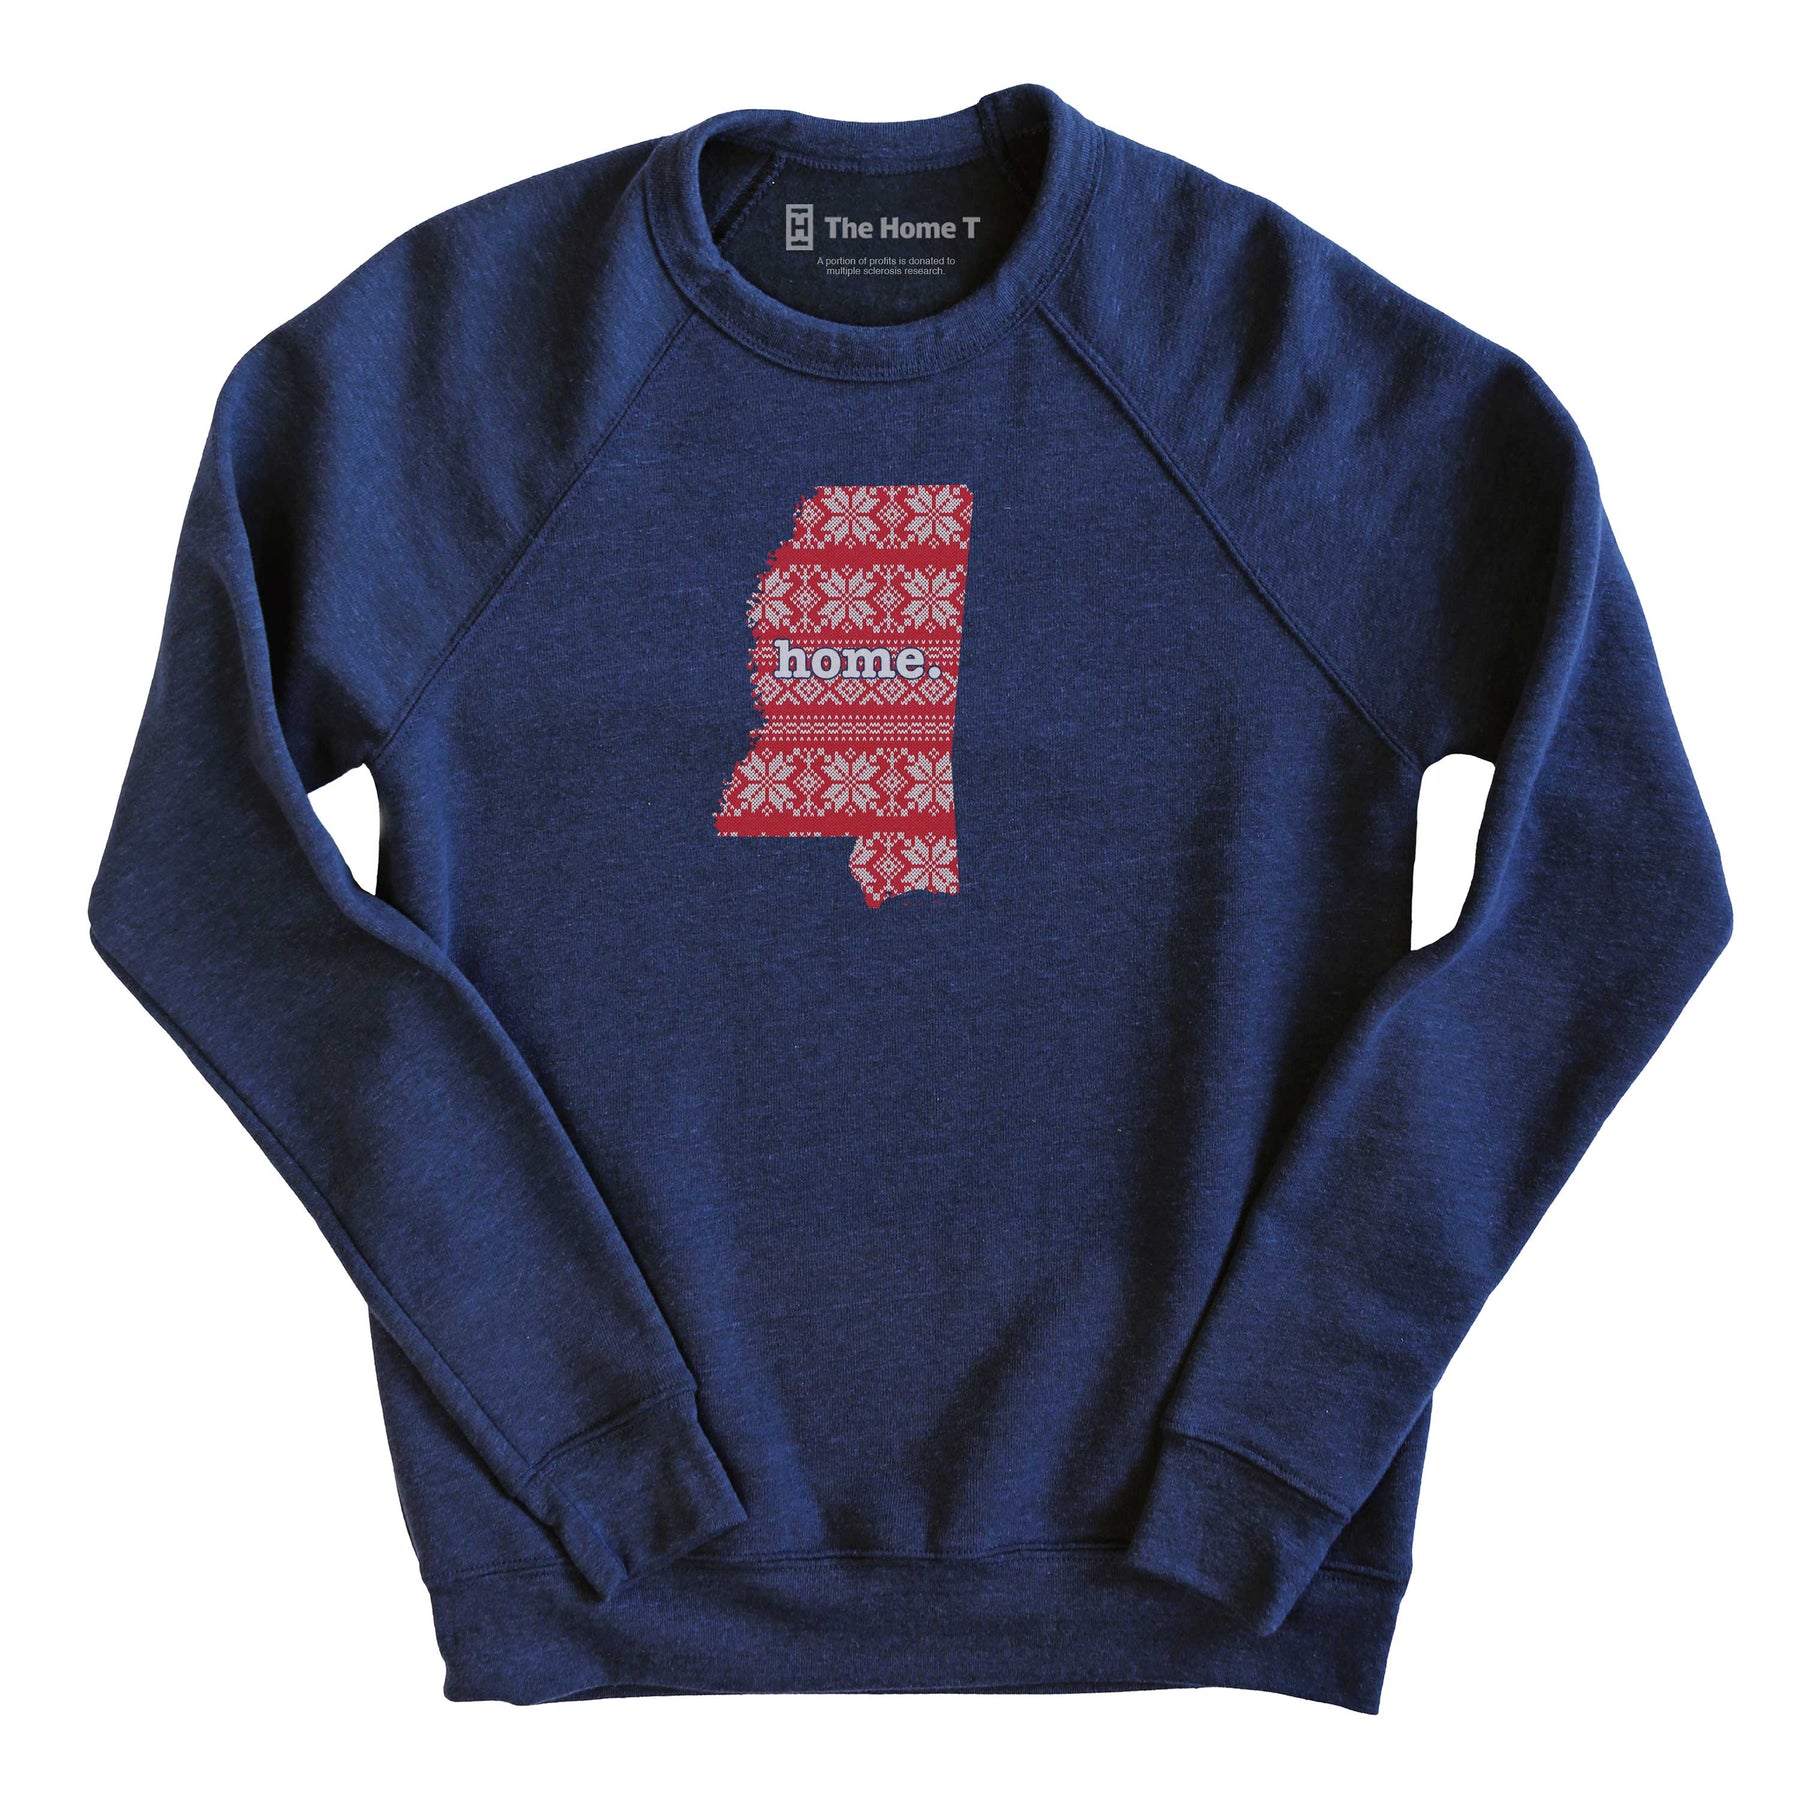 Mississippi Christmas Sweater Pattern Christmas Sweater The Home T XS Navy Sweatshirt